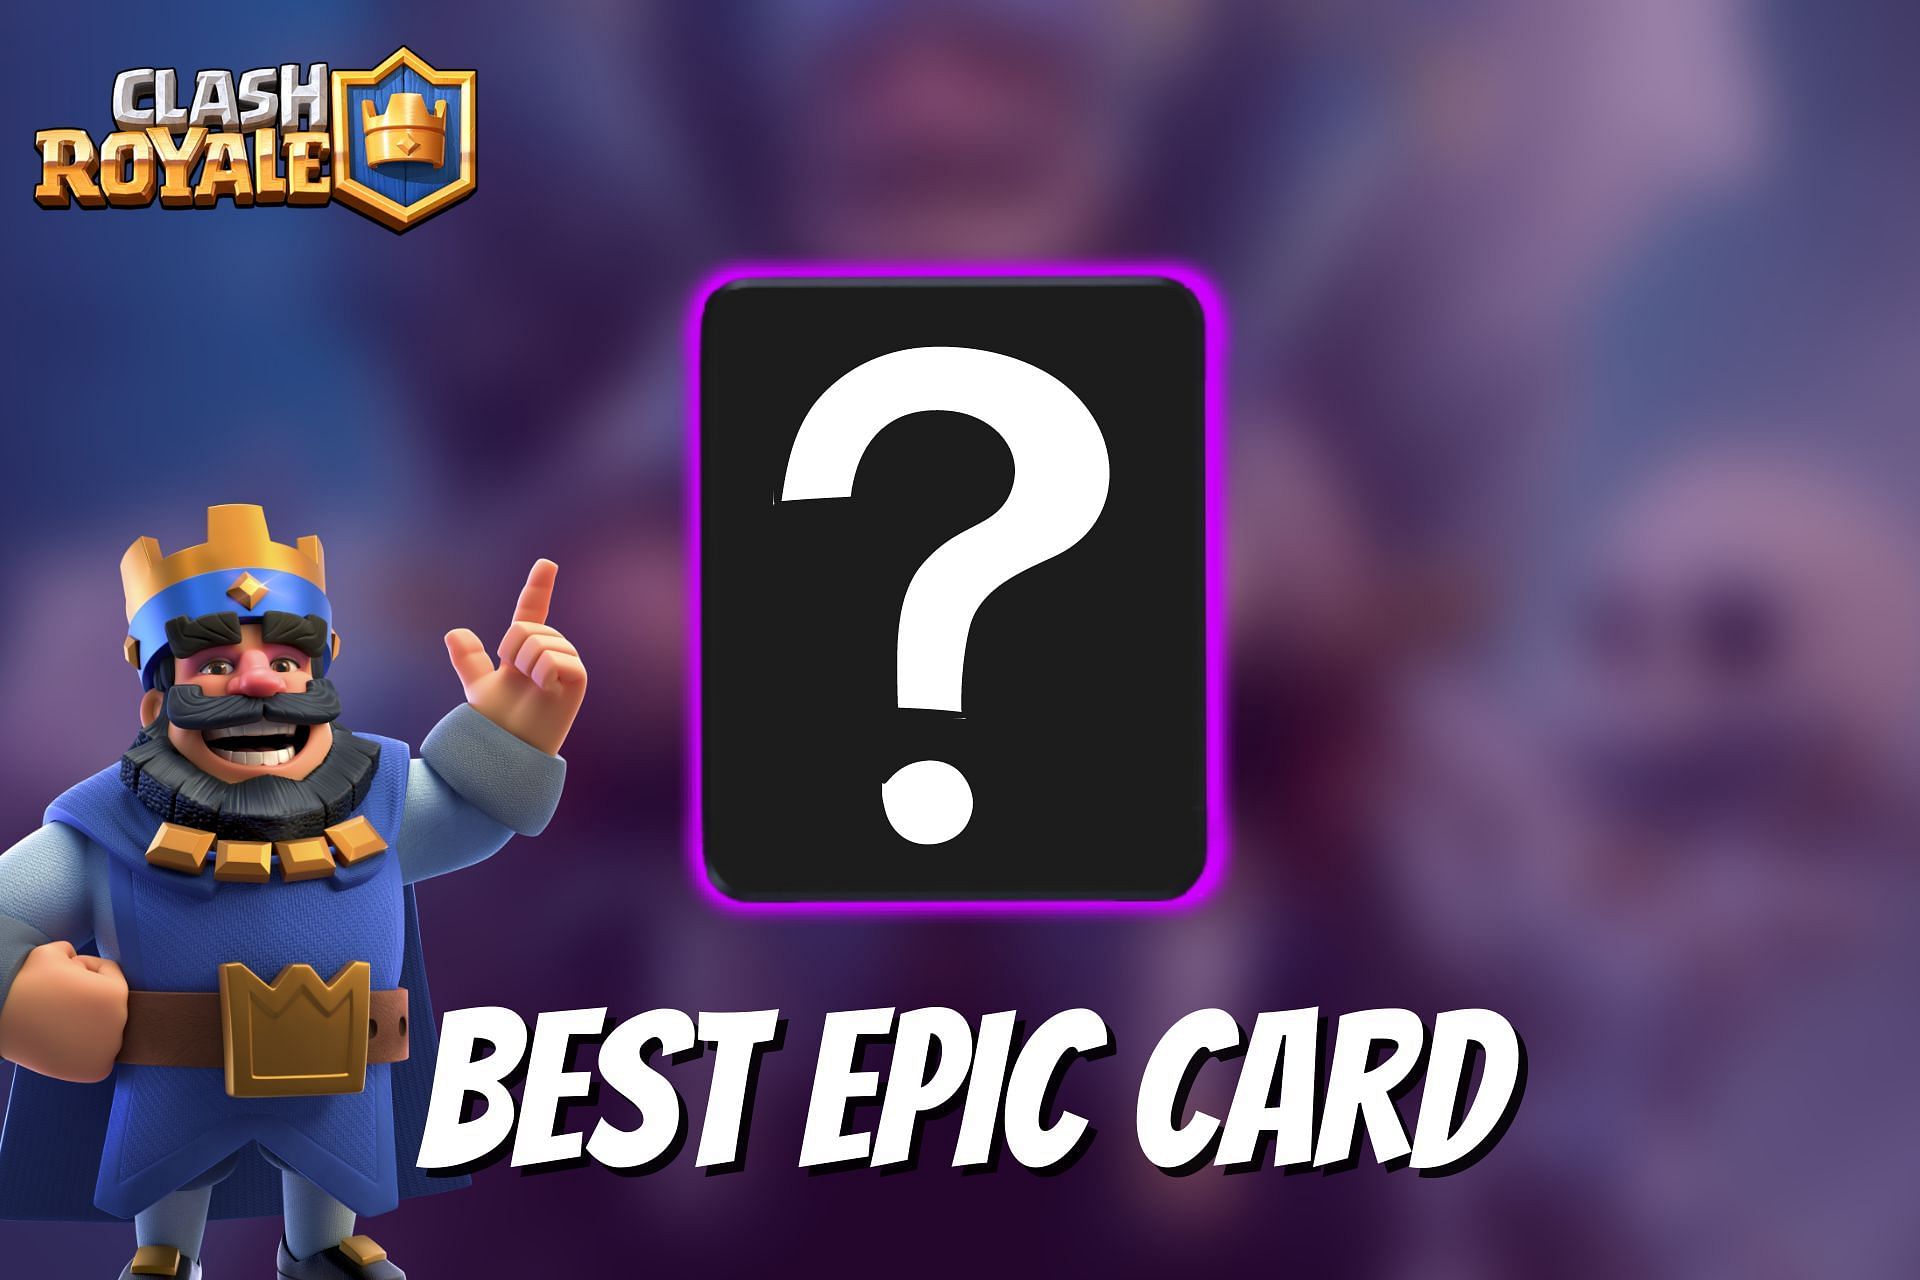 Which is the best Epic card in Clash Royale?